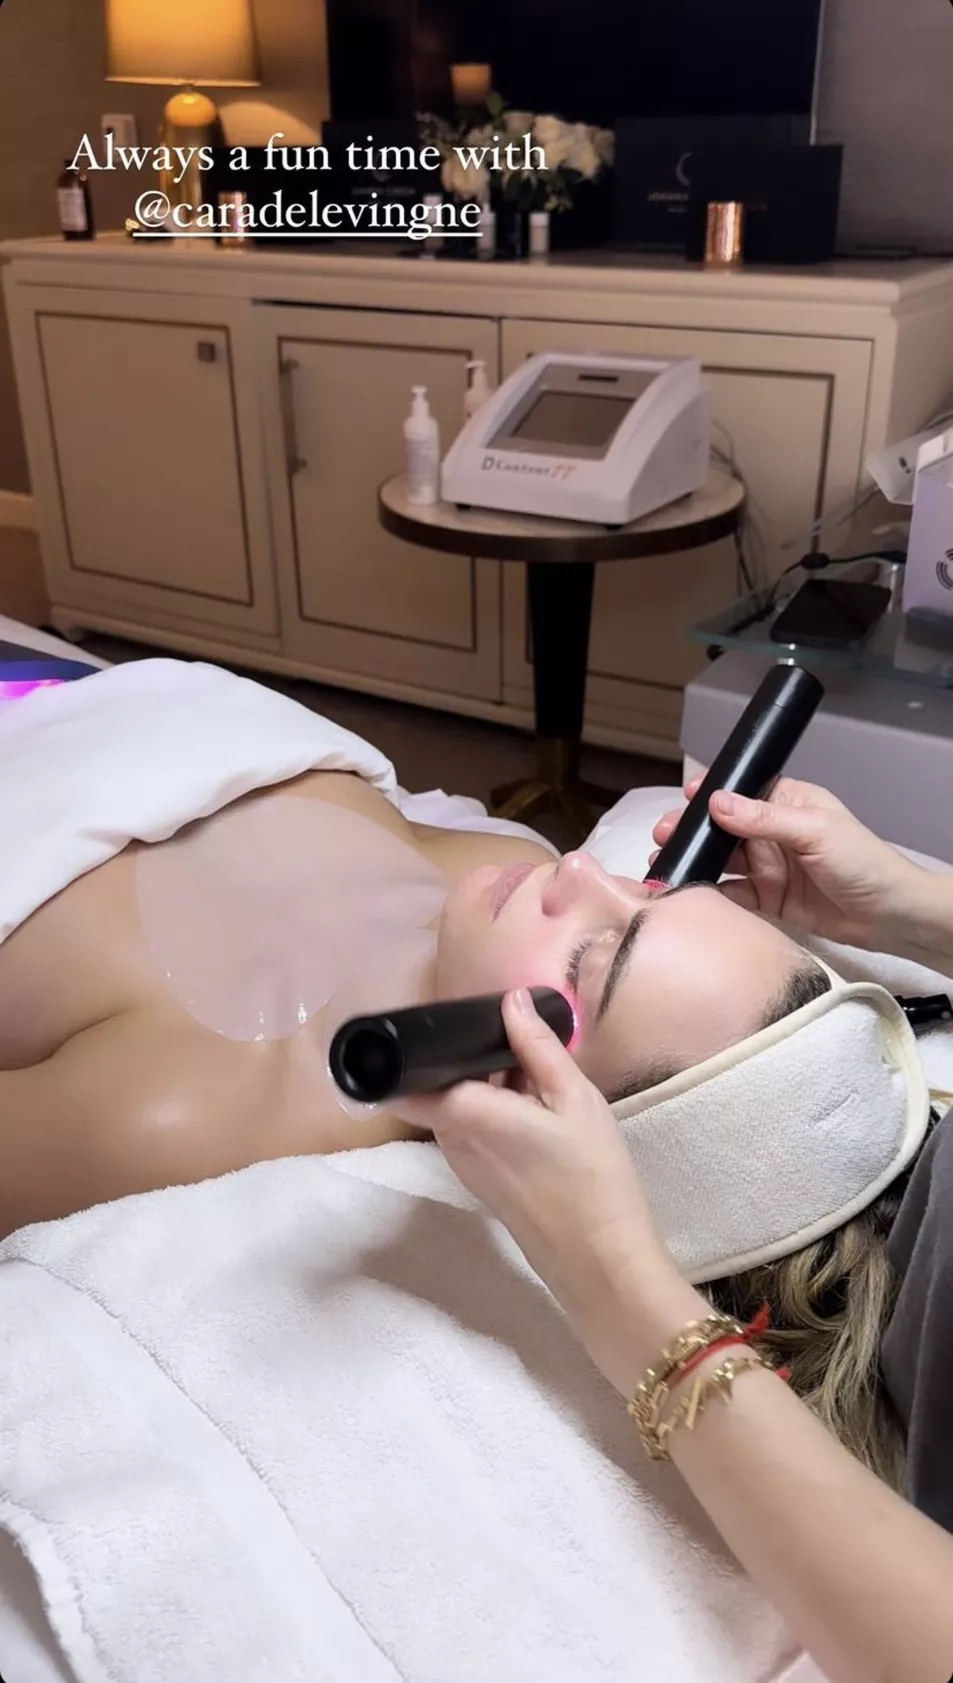 Cara Delevingne has already received a facial in preparation for the Oscars